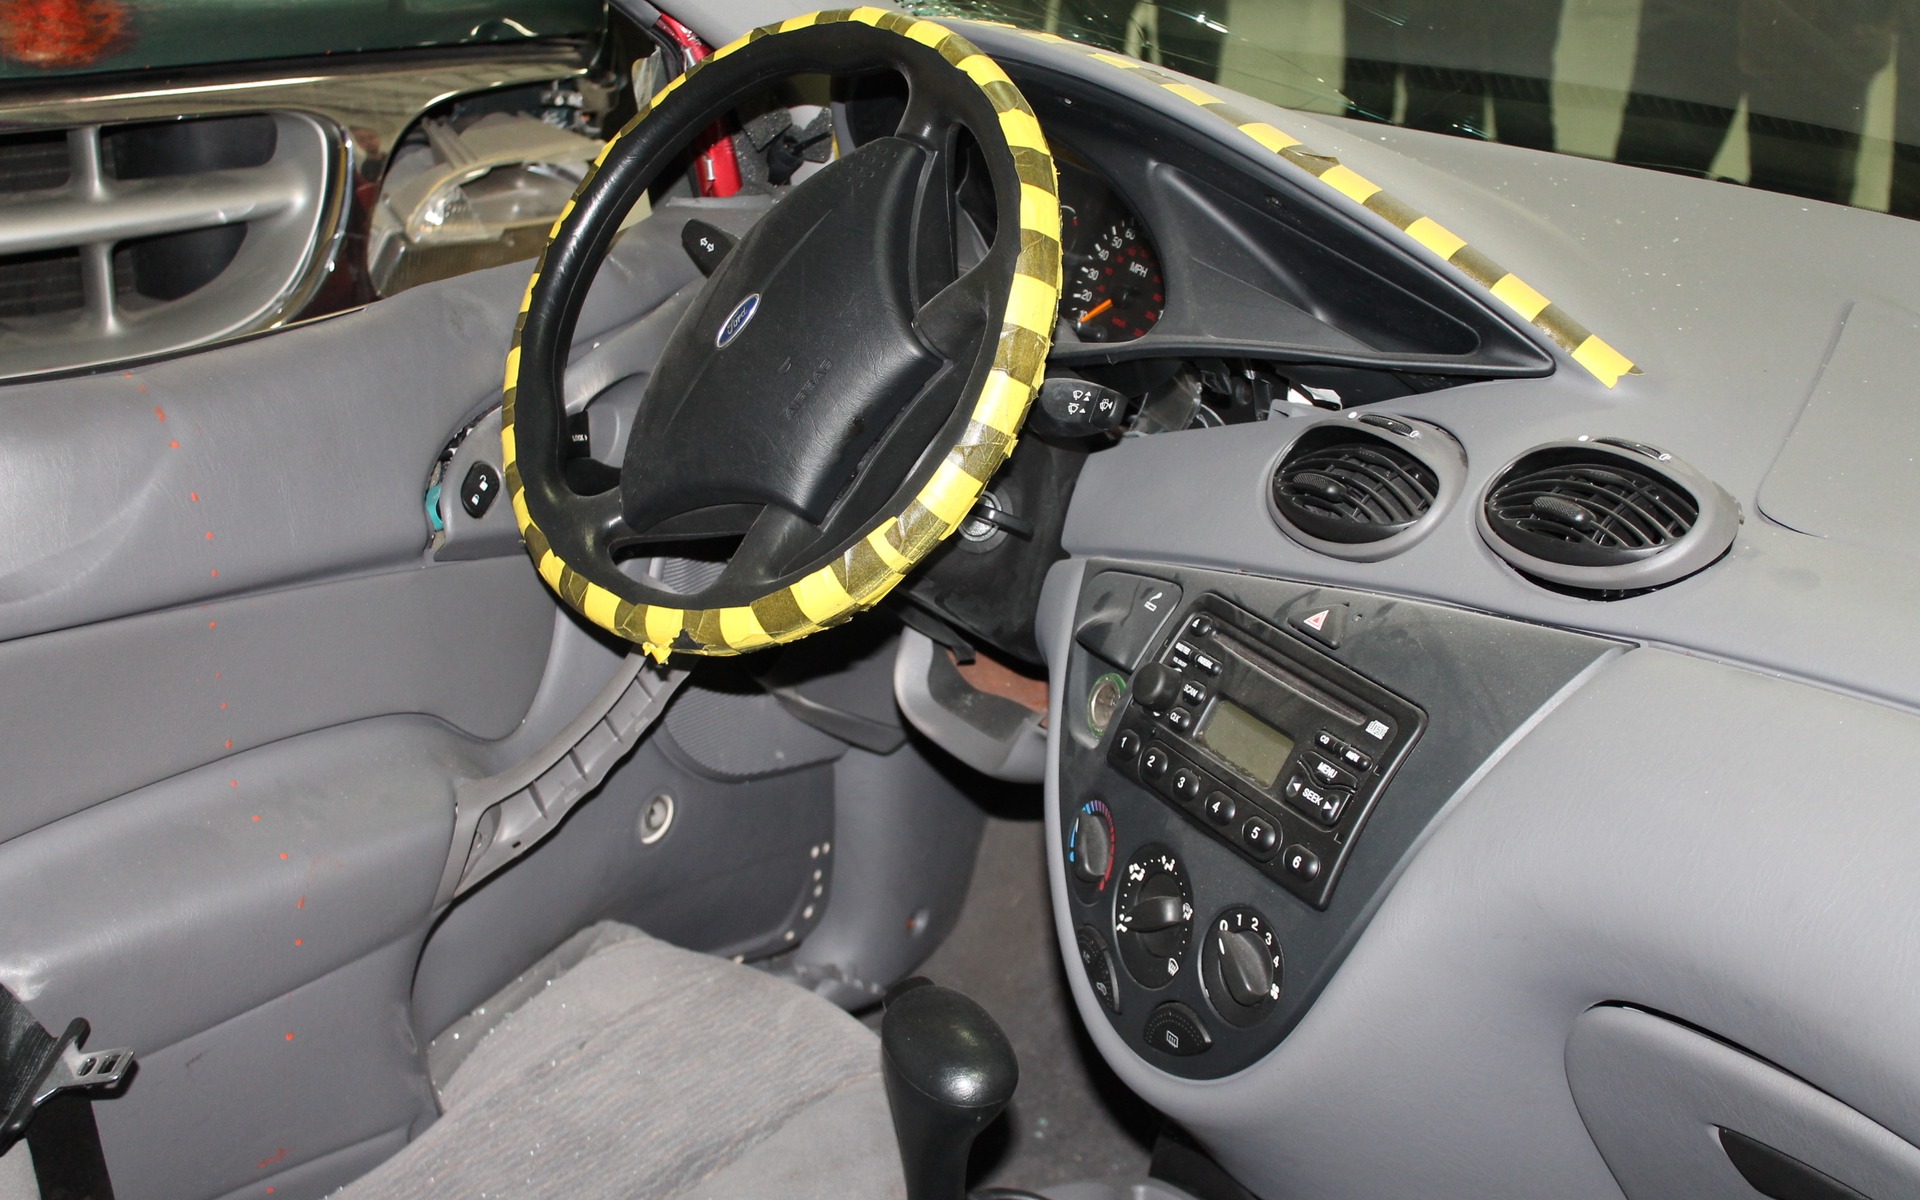 The cockpit of a first-gen Ford Focus.